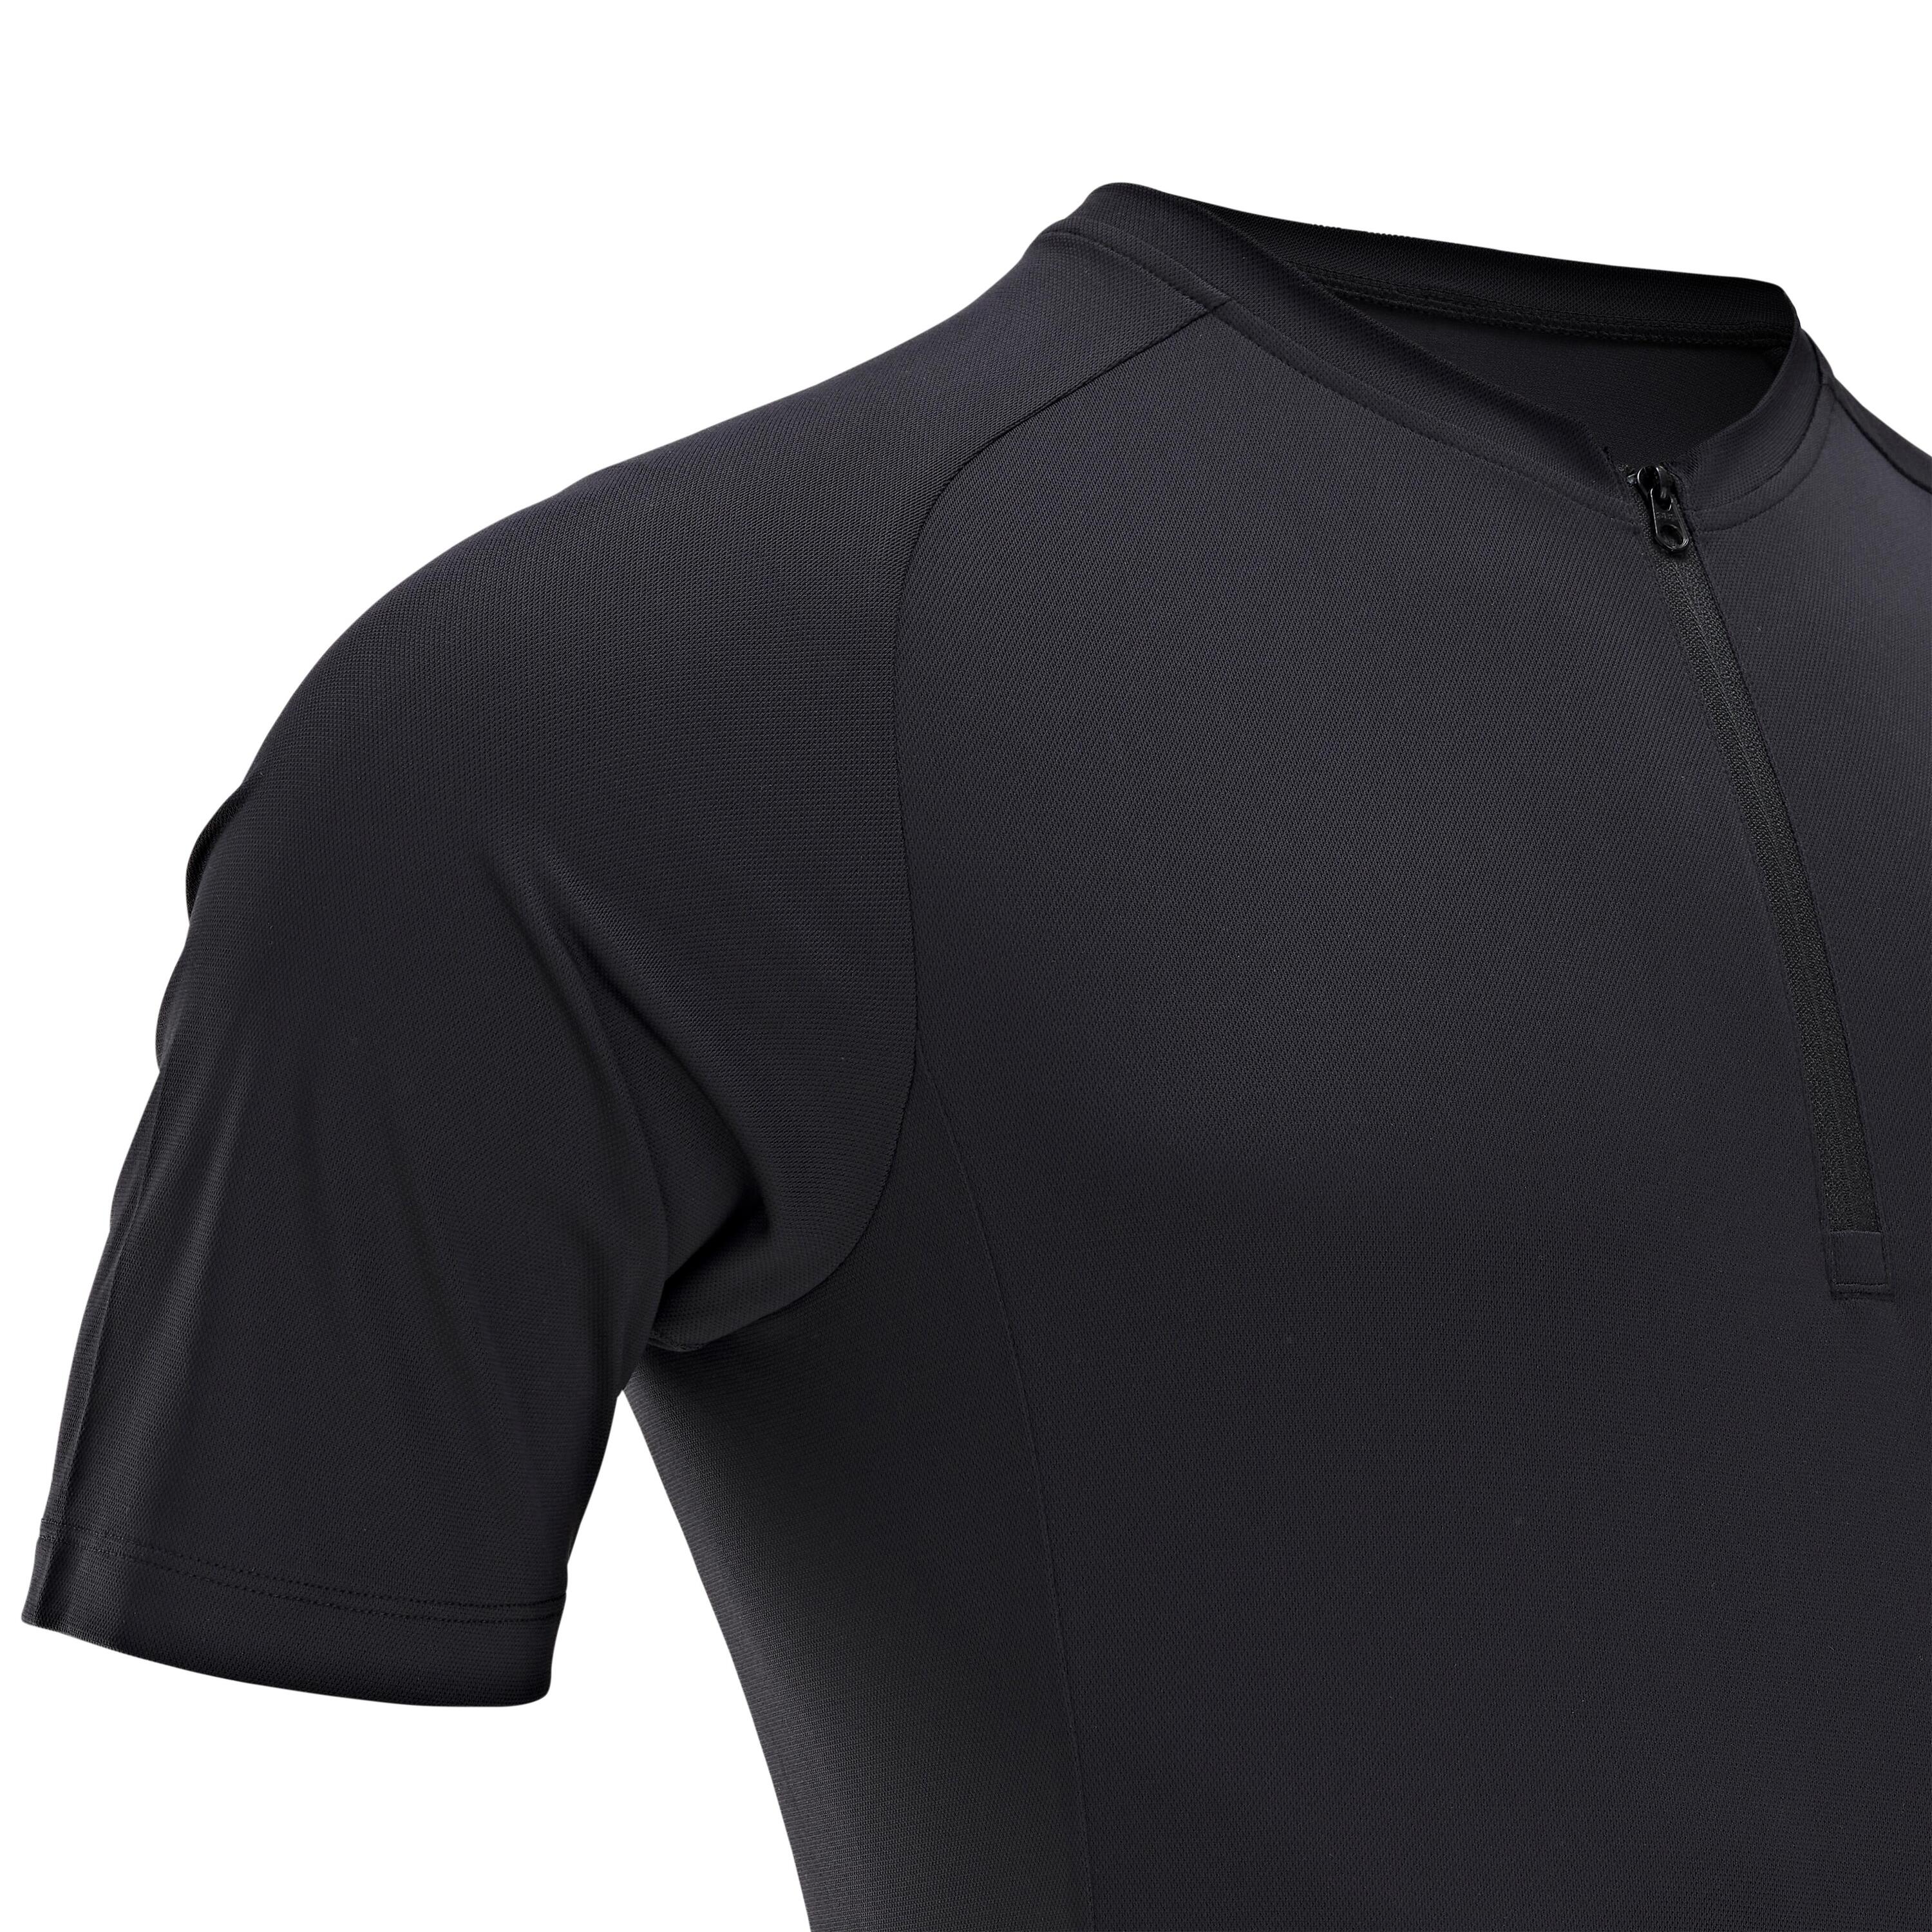 Men's Road Cycling Short-Sleeved Summer Jersey Essential - Black 4/7